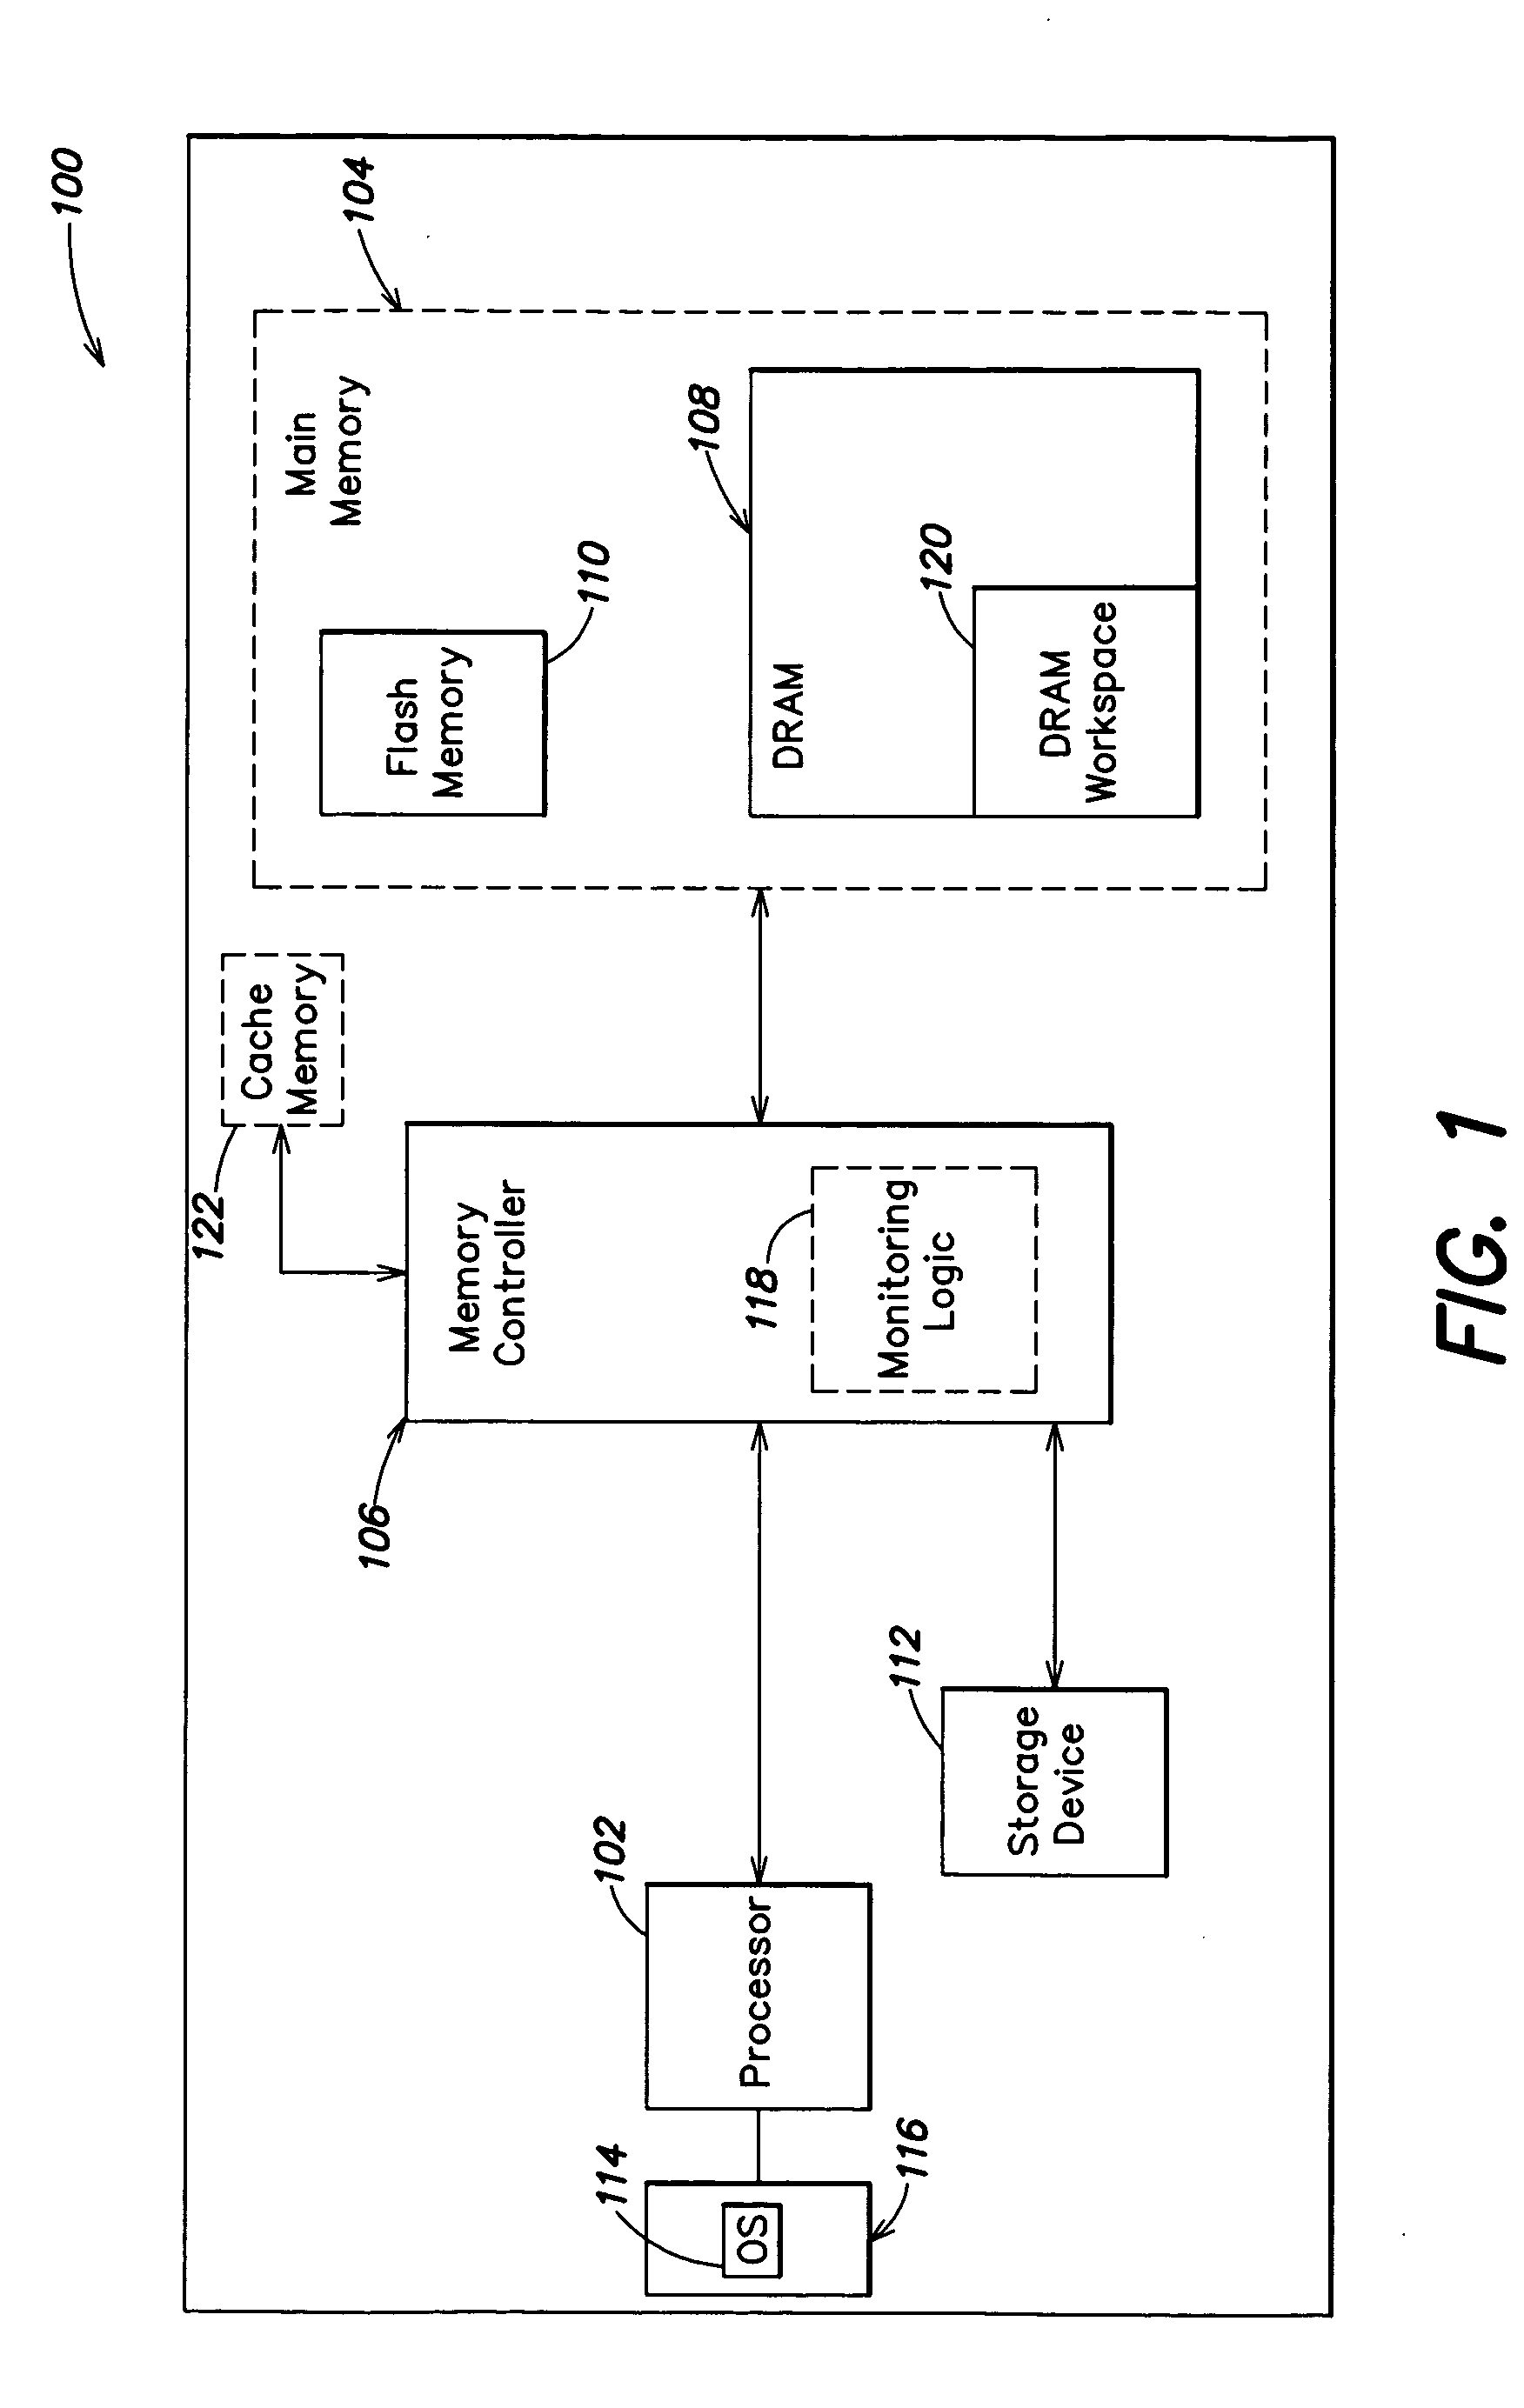 Methods and apparatus for efficient memory usage